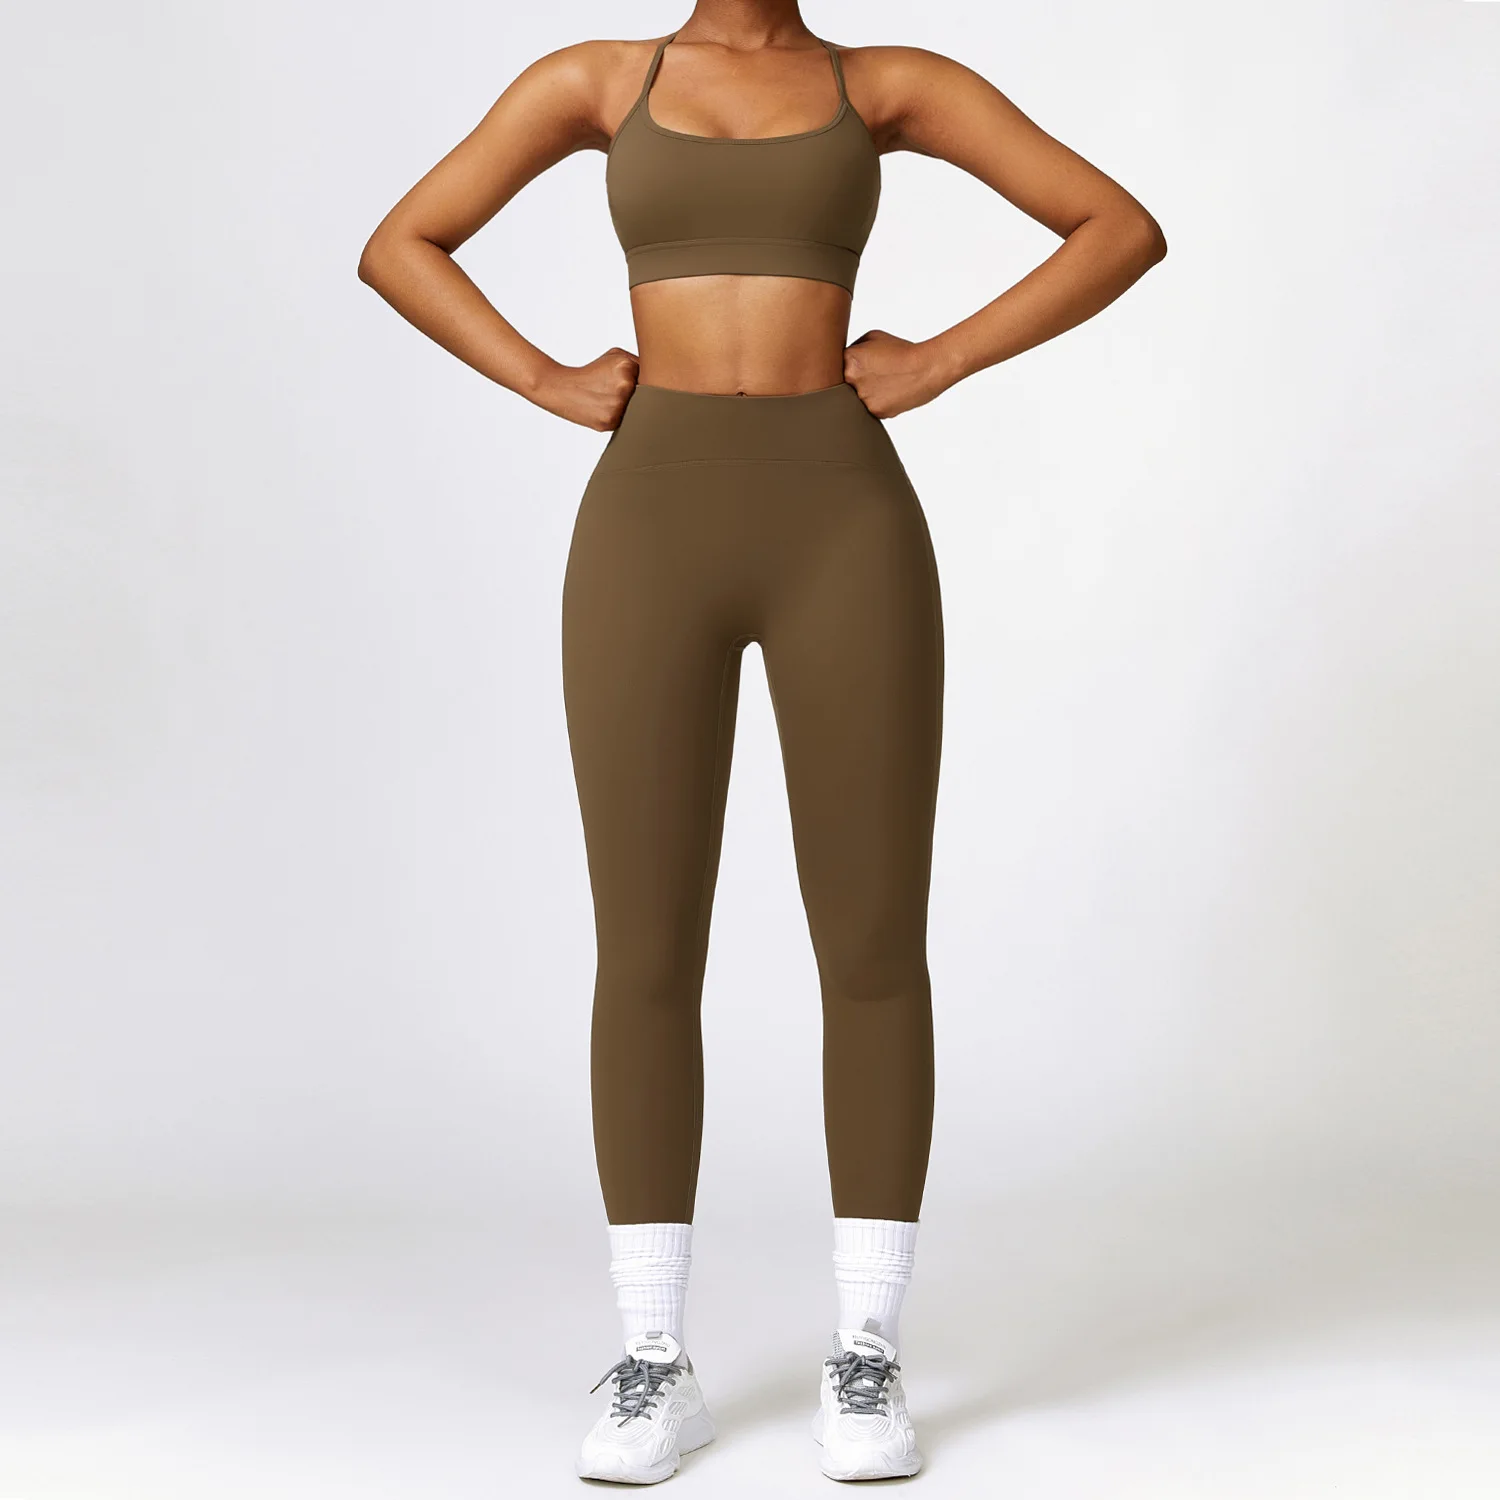 YIYI Recycled Fabrics Comfortable Outdoor Girls Suits High Waist Leggings Sets Gym Fitness Sets Quick Dry Womens Workout Sets